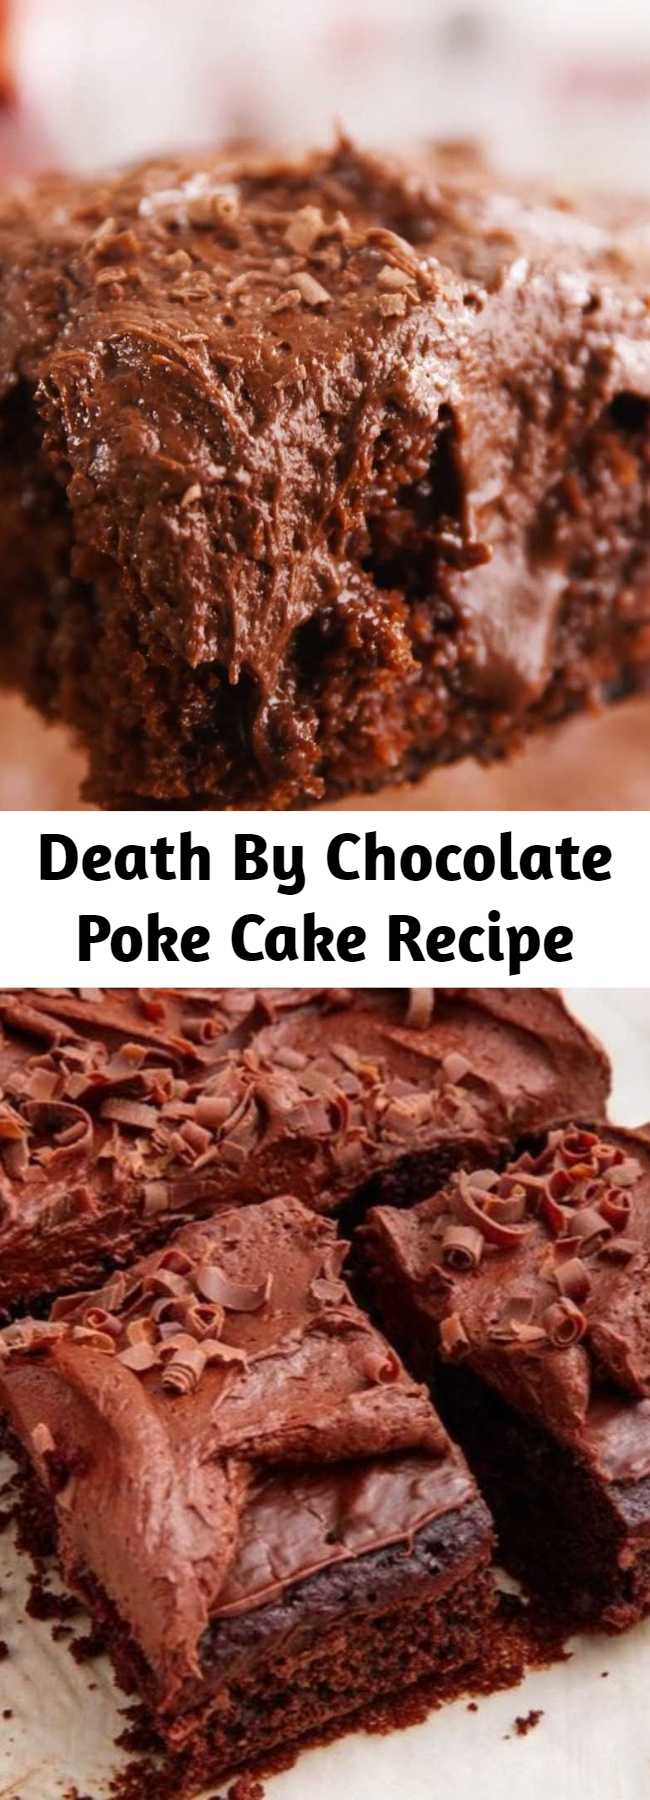 Death By Chocolate Poke Cake Recipe - Chocolate cake, chocolate fudge filling, and chocolate buttermilk…this recipe is for serious chocoholics only. #easy #recipe #dessert #chocolate #pokecake #deathbychocolate #desserts #baking #cake